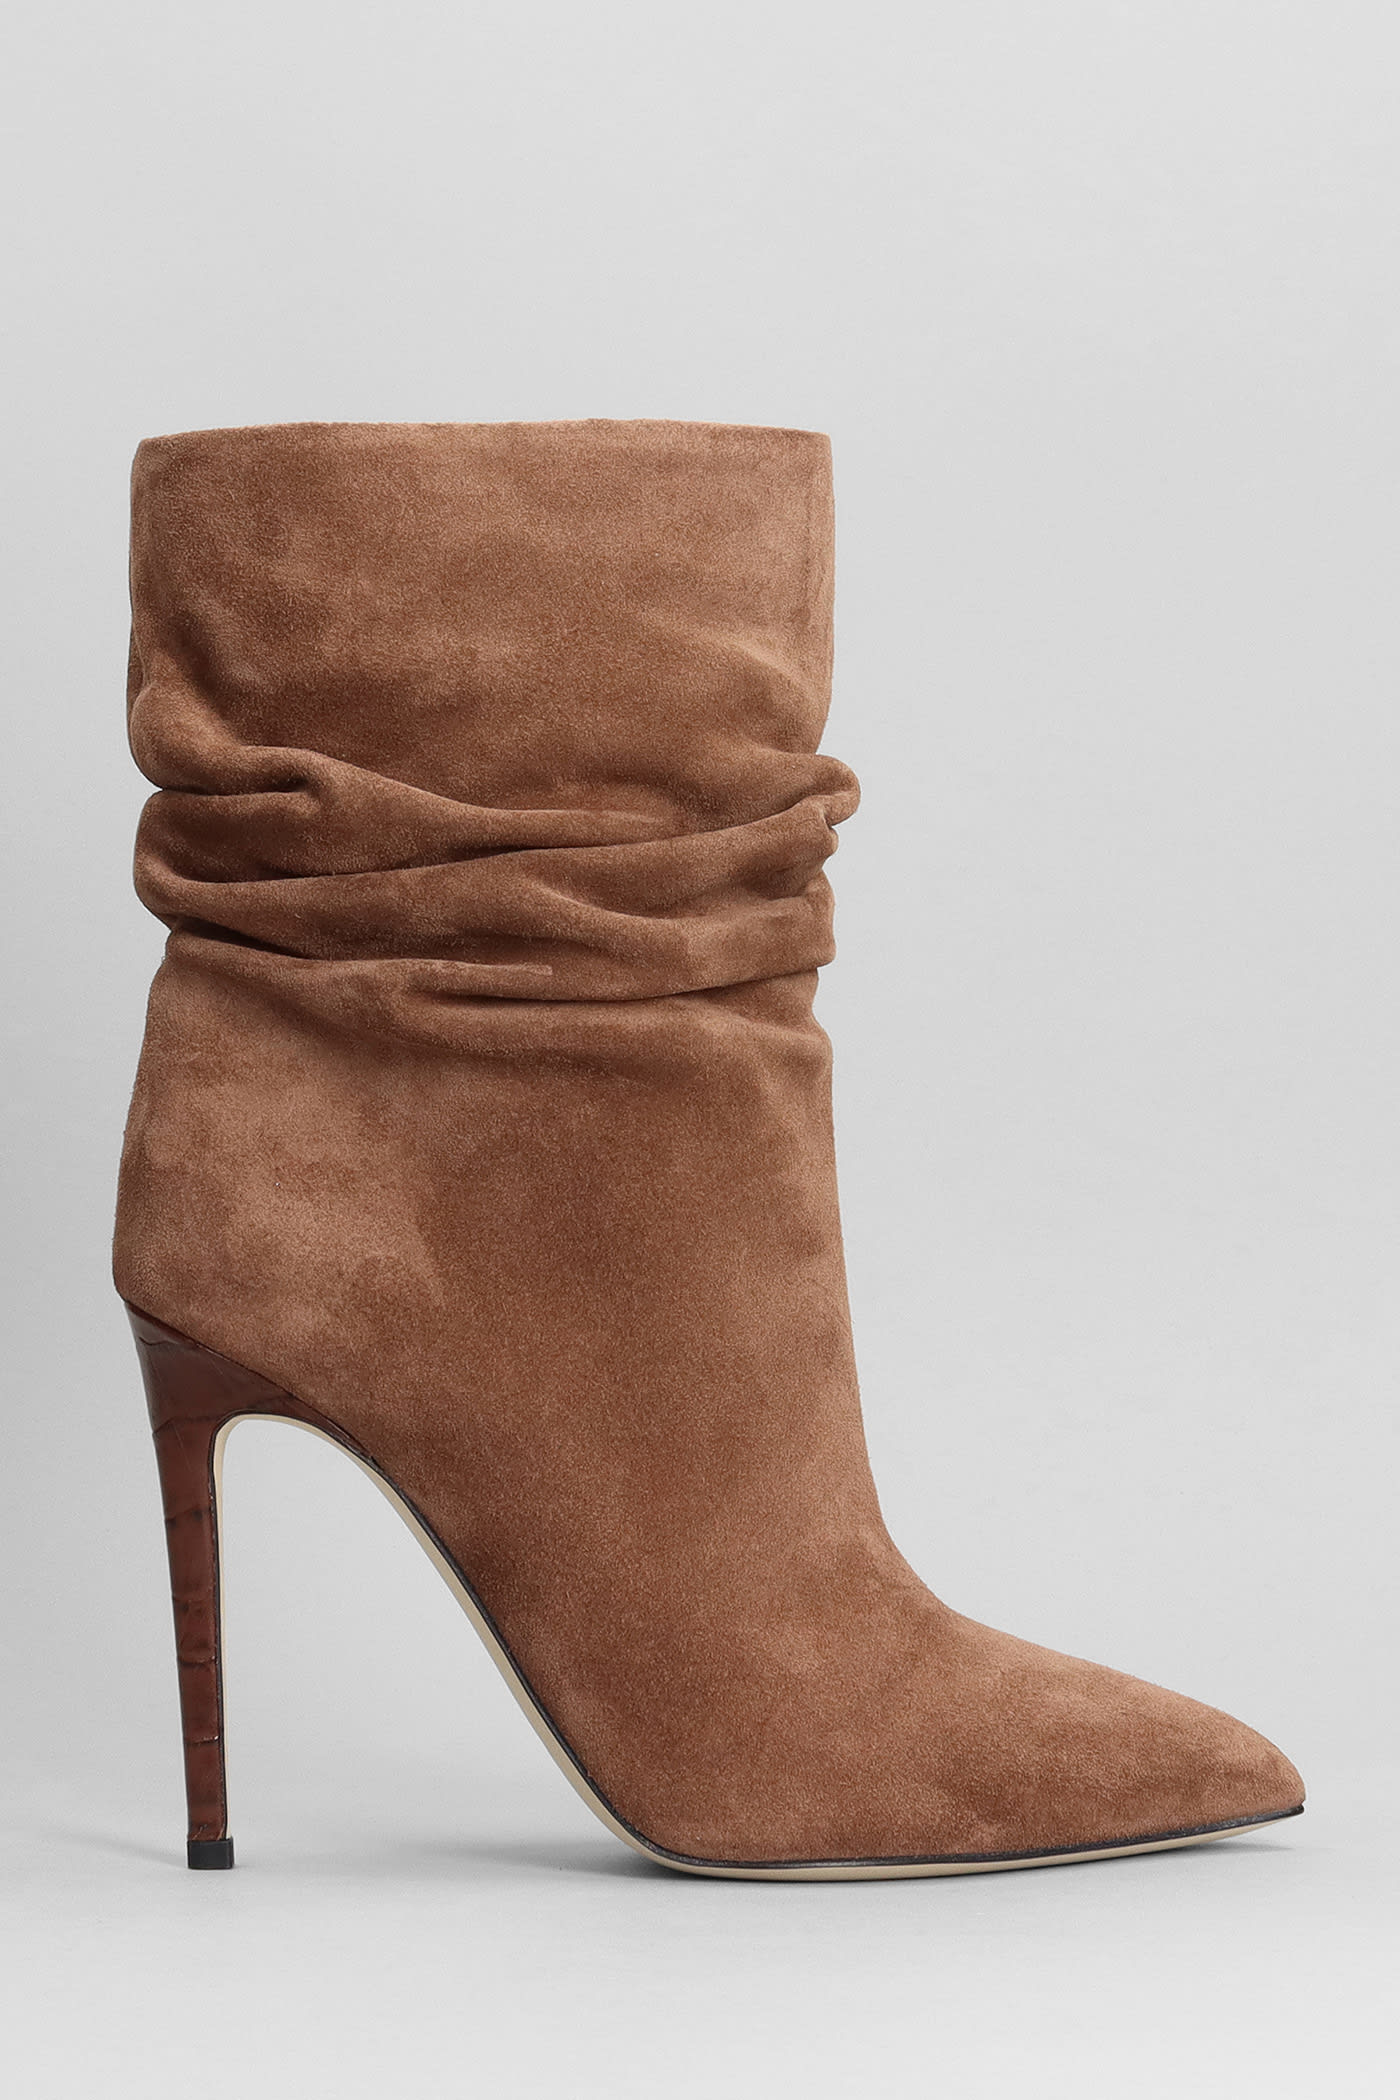 PARIS TEXAS HIGH HEELS ANKLE BOOTS IN BROWN SUEDE